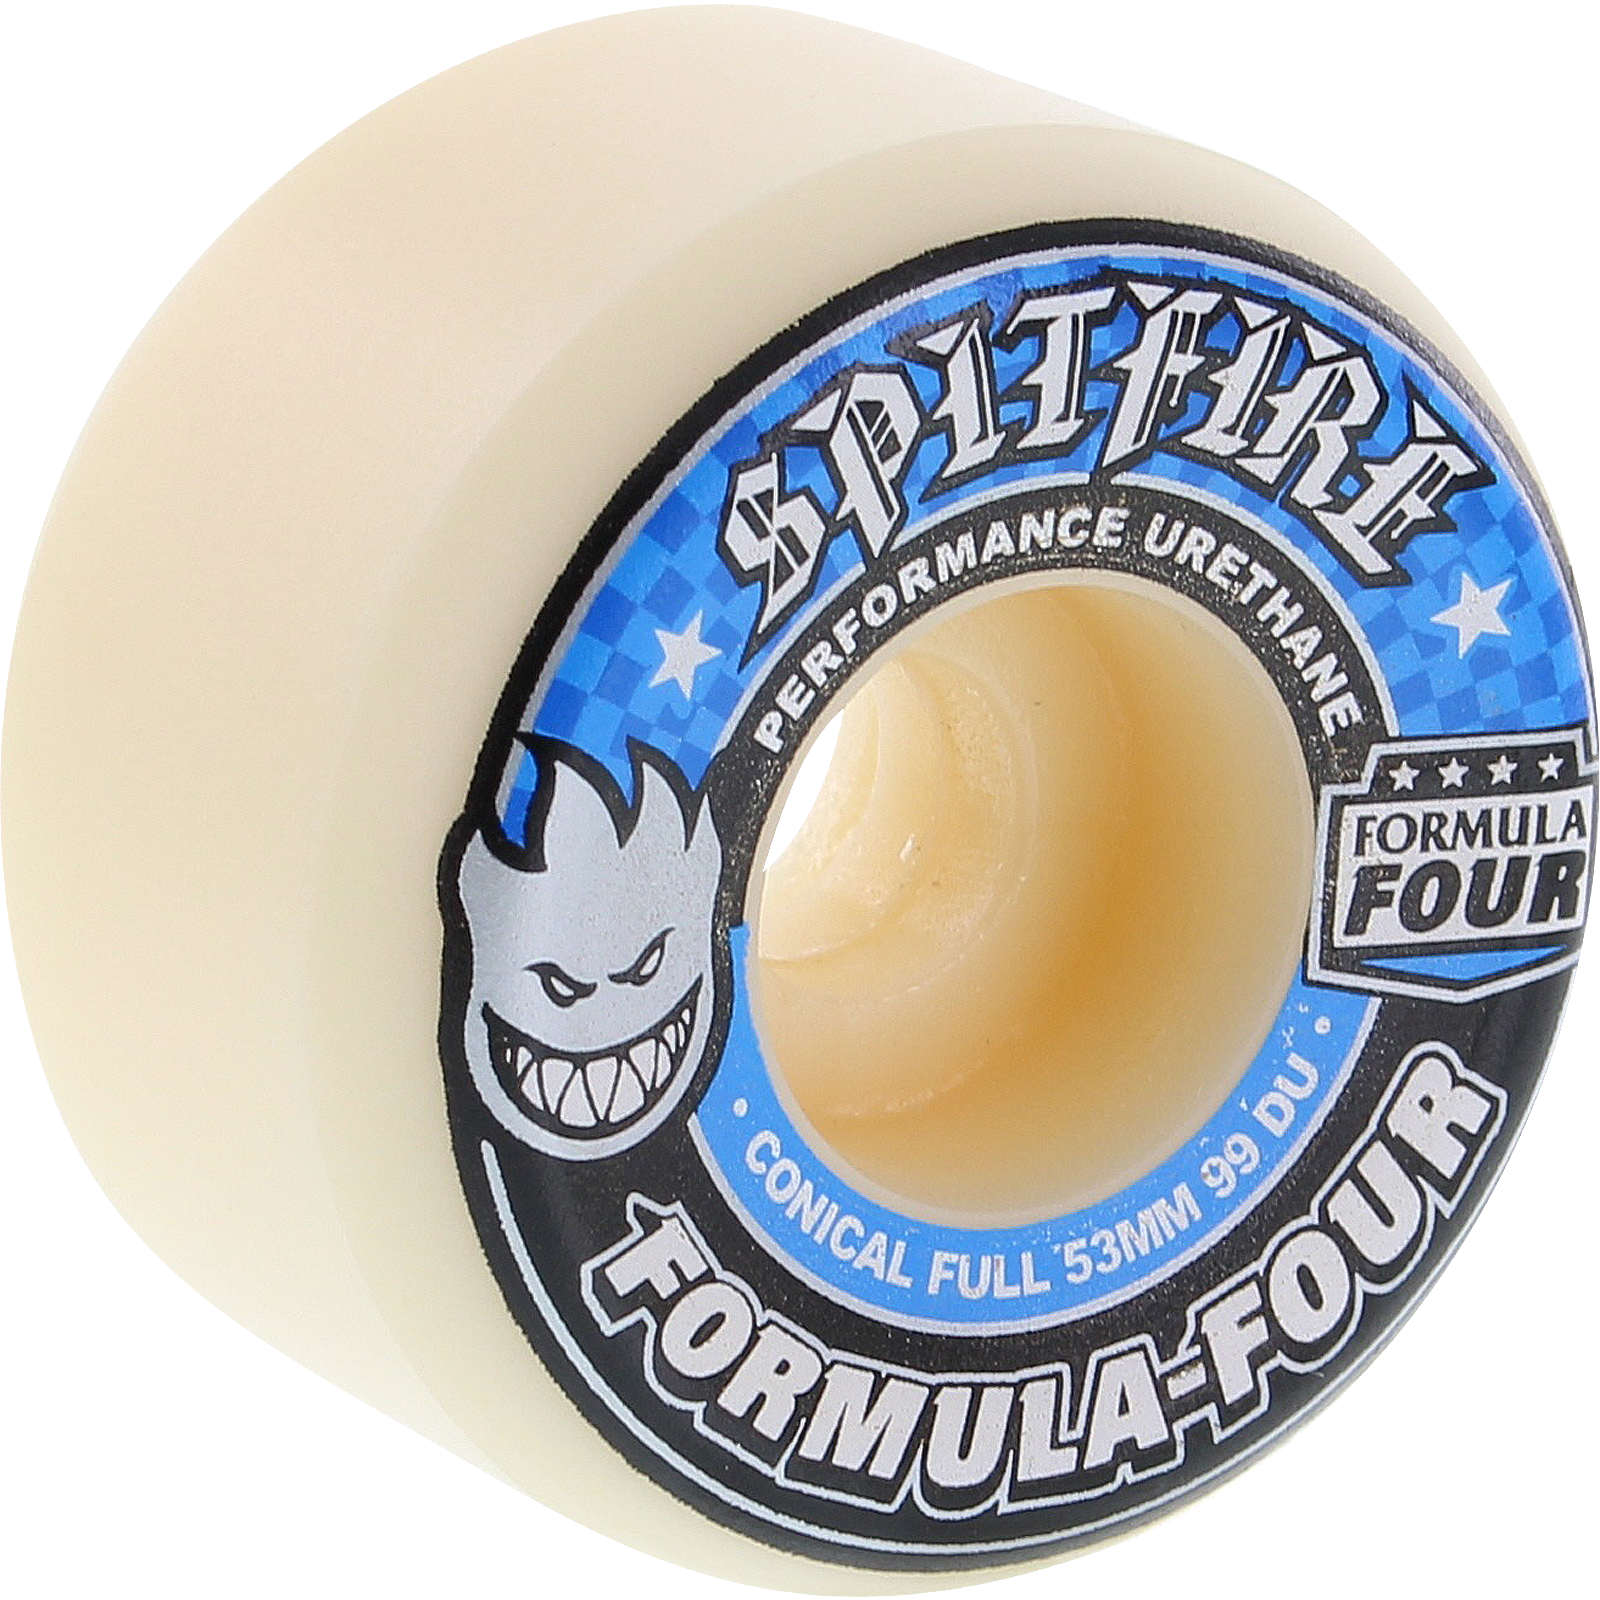 Spitfire F4 99a Conical Full 53mm White W/Blue Skateboard Wheels (Set of 4)